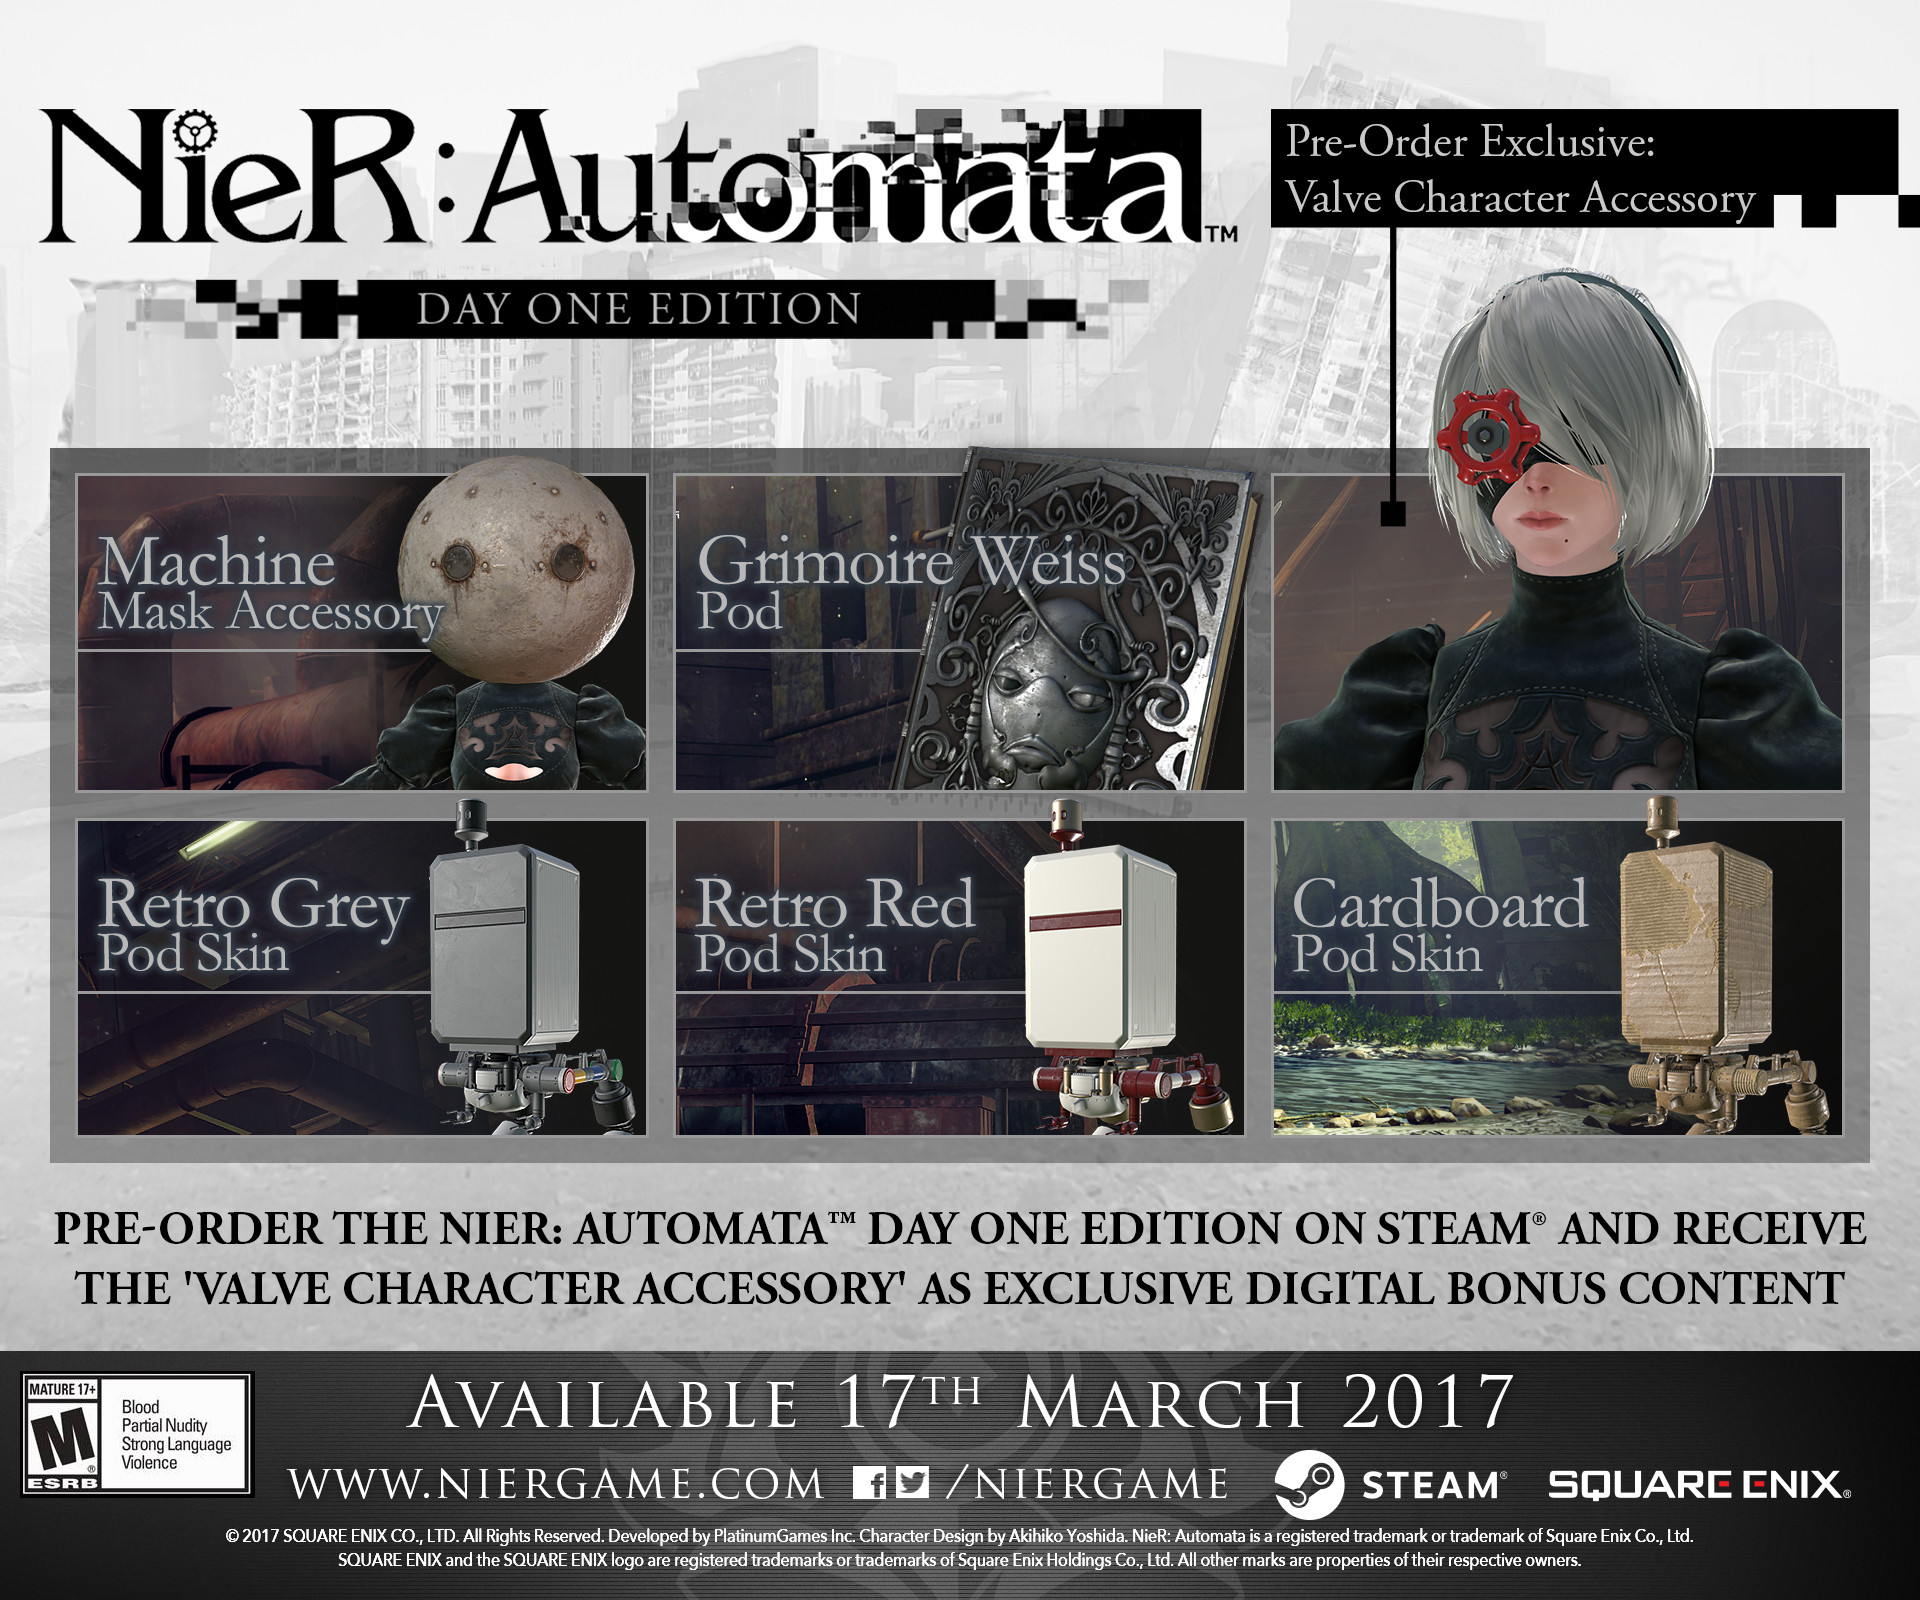 Steam :: NieR:Automata™ :: NieR:Automata is coming to Steam on 17th March  2017!